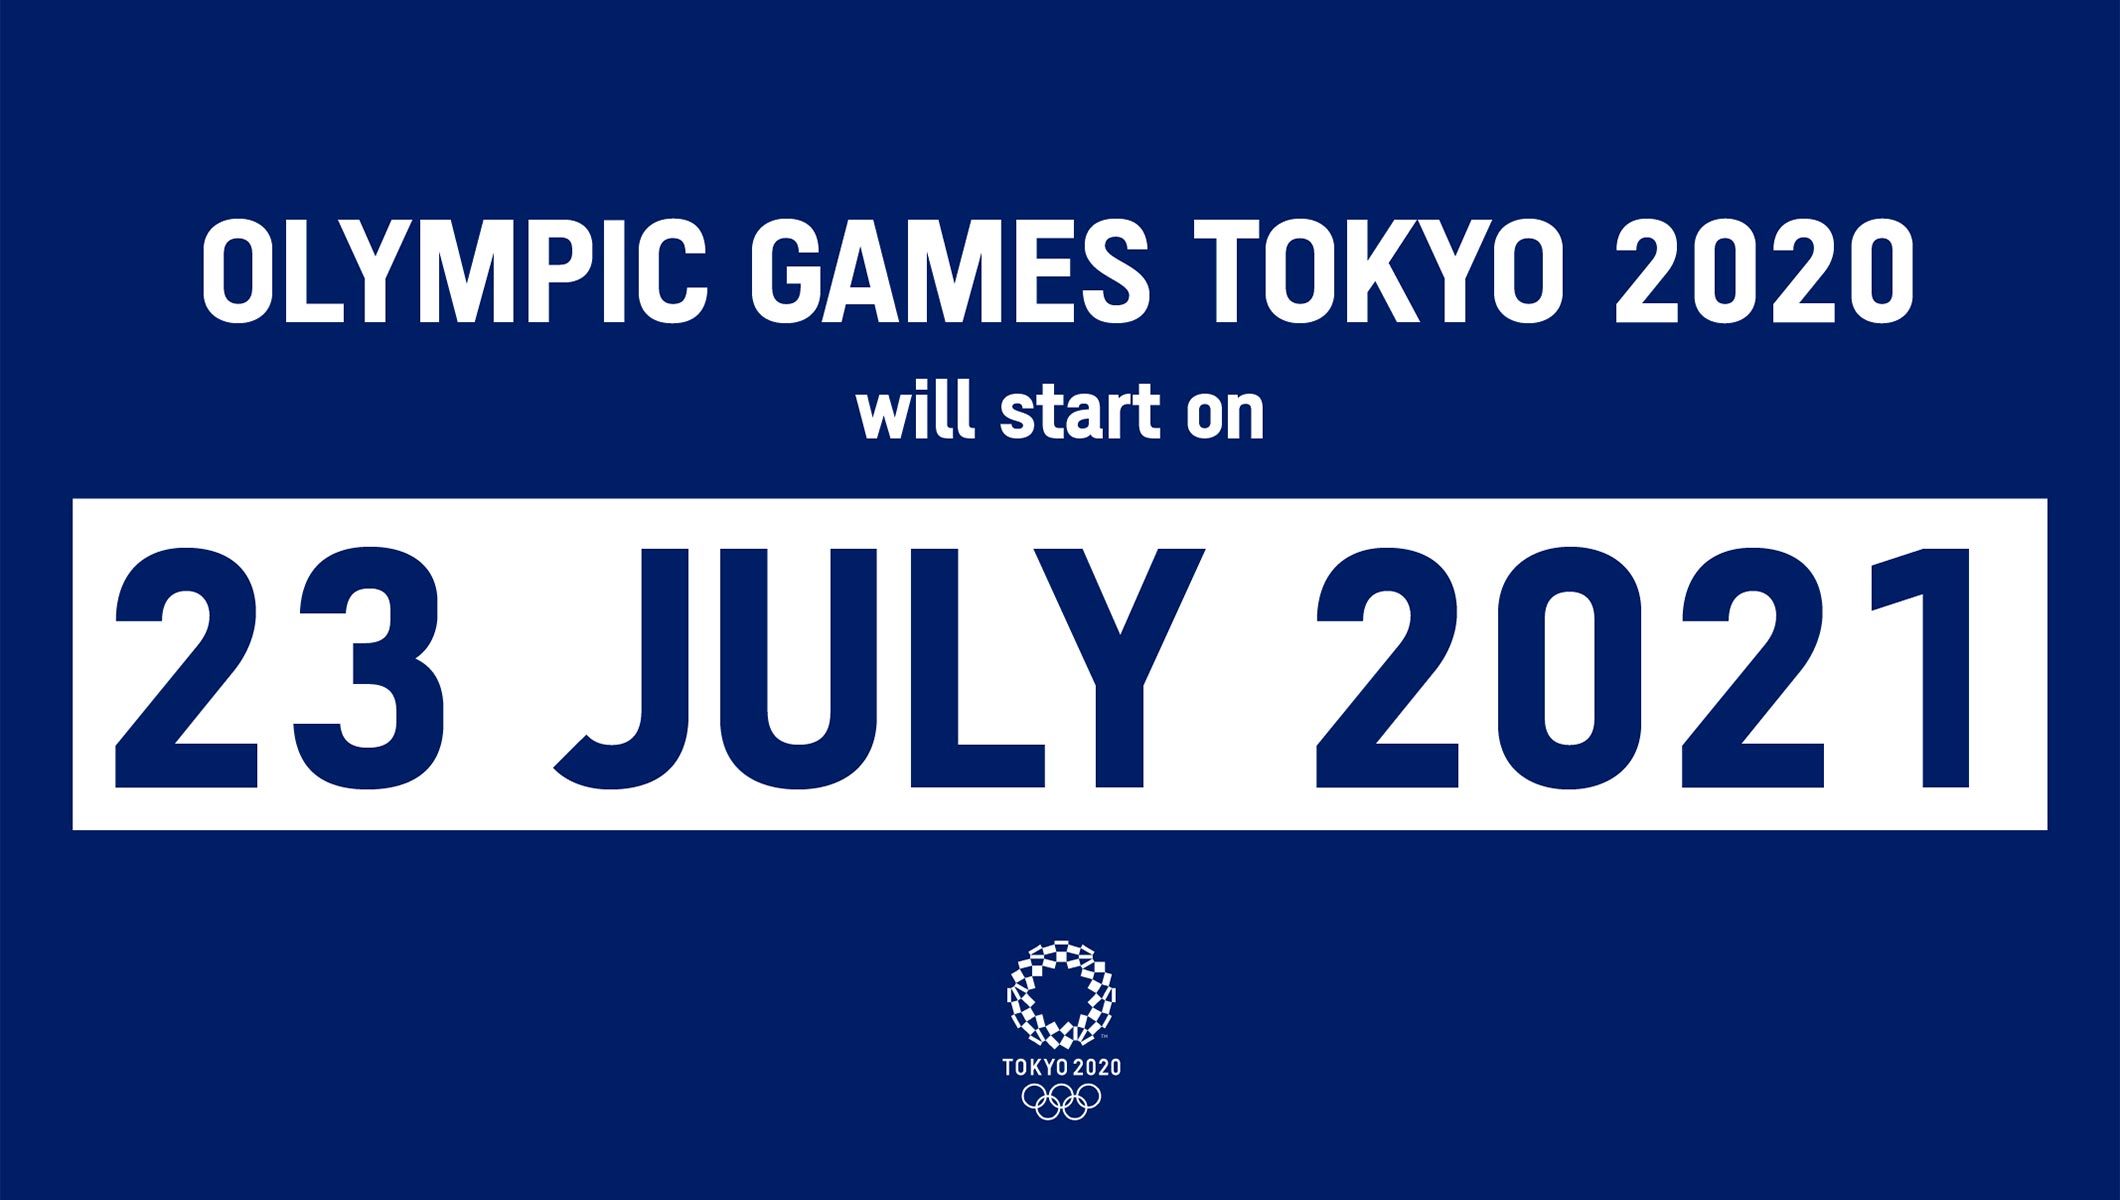 Ioc Ipc Tokyo 2020 Organising Committee And Tokyo Metropolitan Government Announce New Dates For The Olympic And Paralympic Games Tokyo 2020 Olympic News